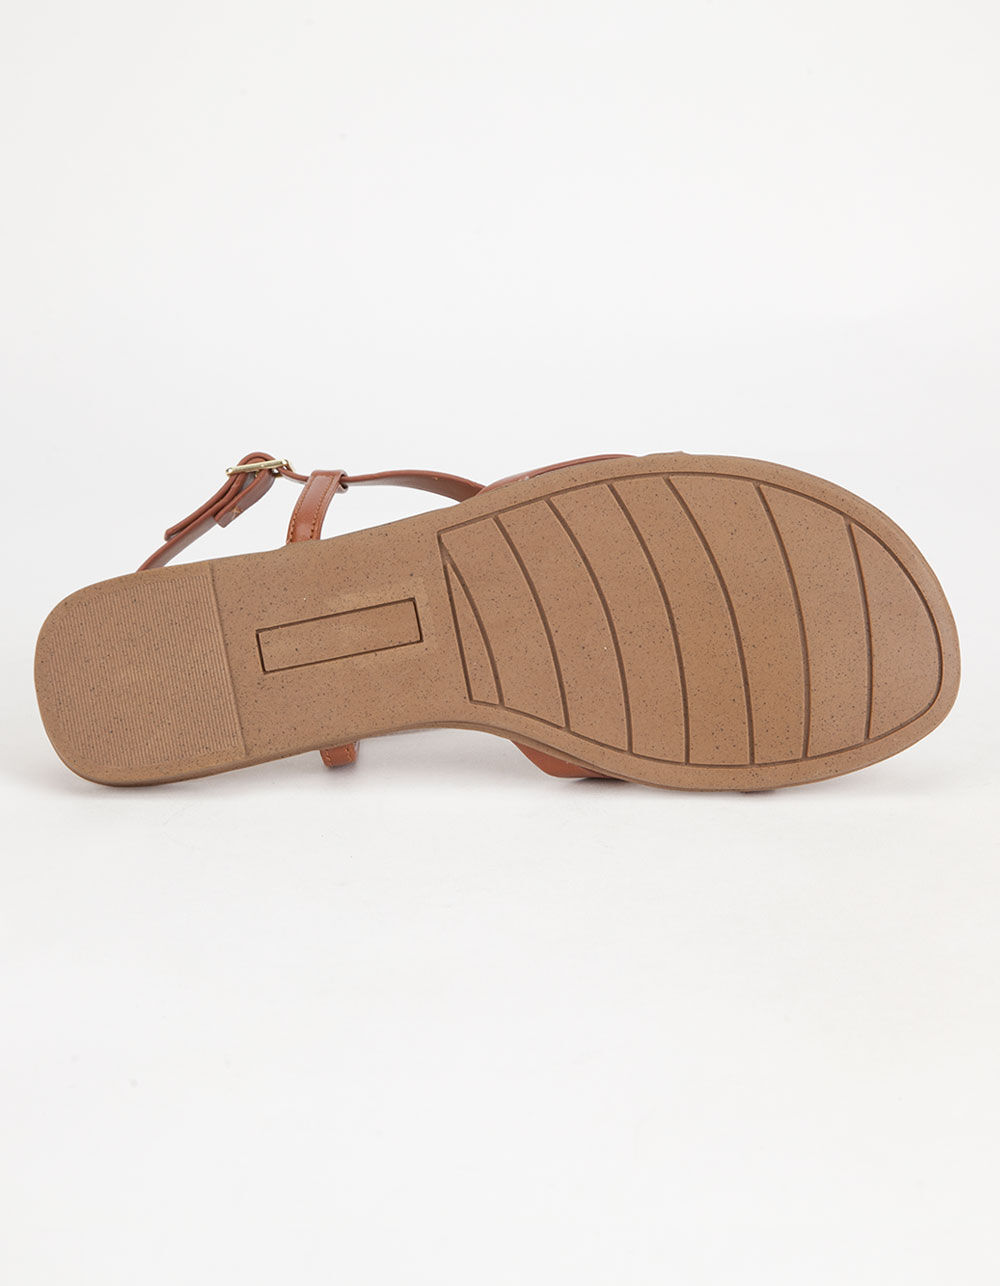 CITY CLASSIFIED Spica Womens Sandals - TAN | Tillys